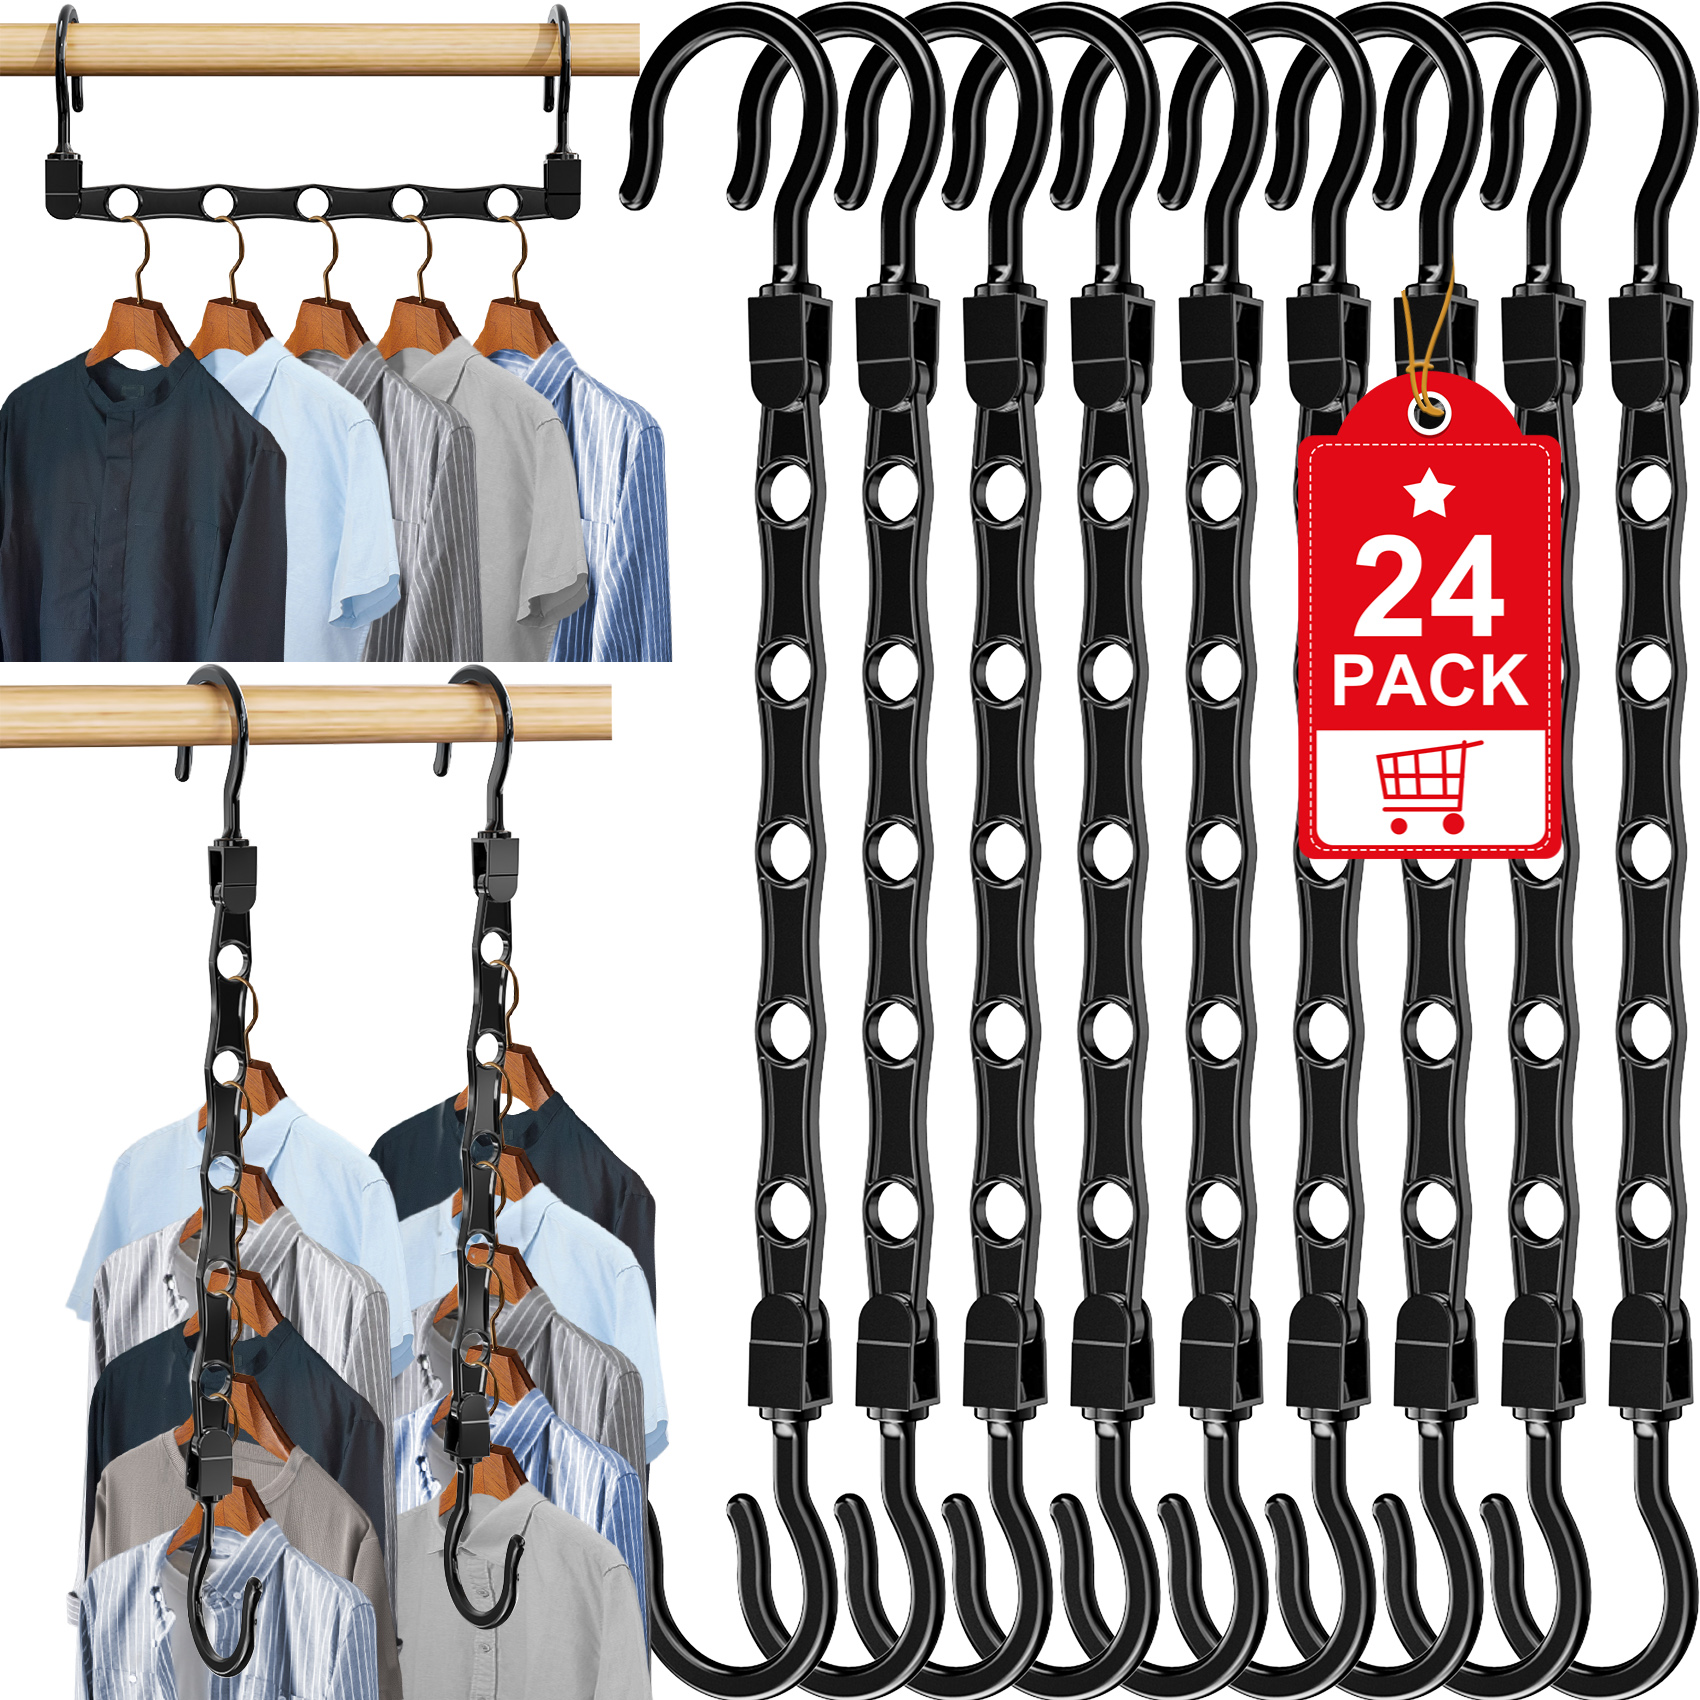 The Space-Saving Hangers Shoppers Call 'Magic' Are on Sale at